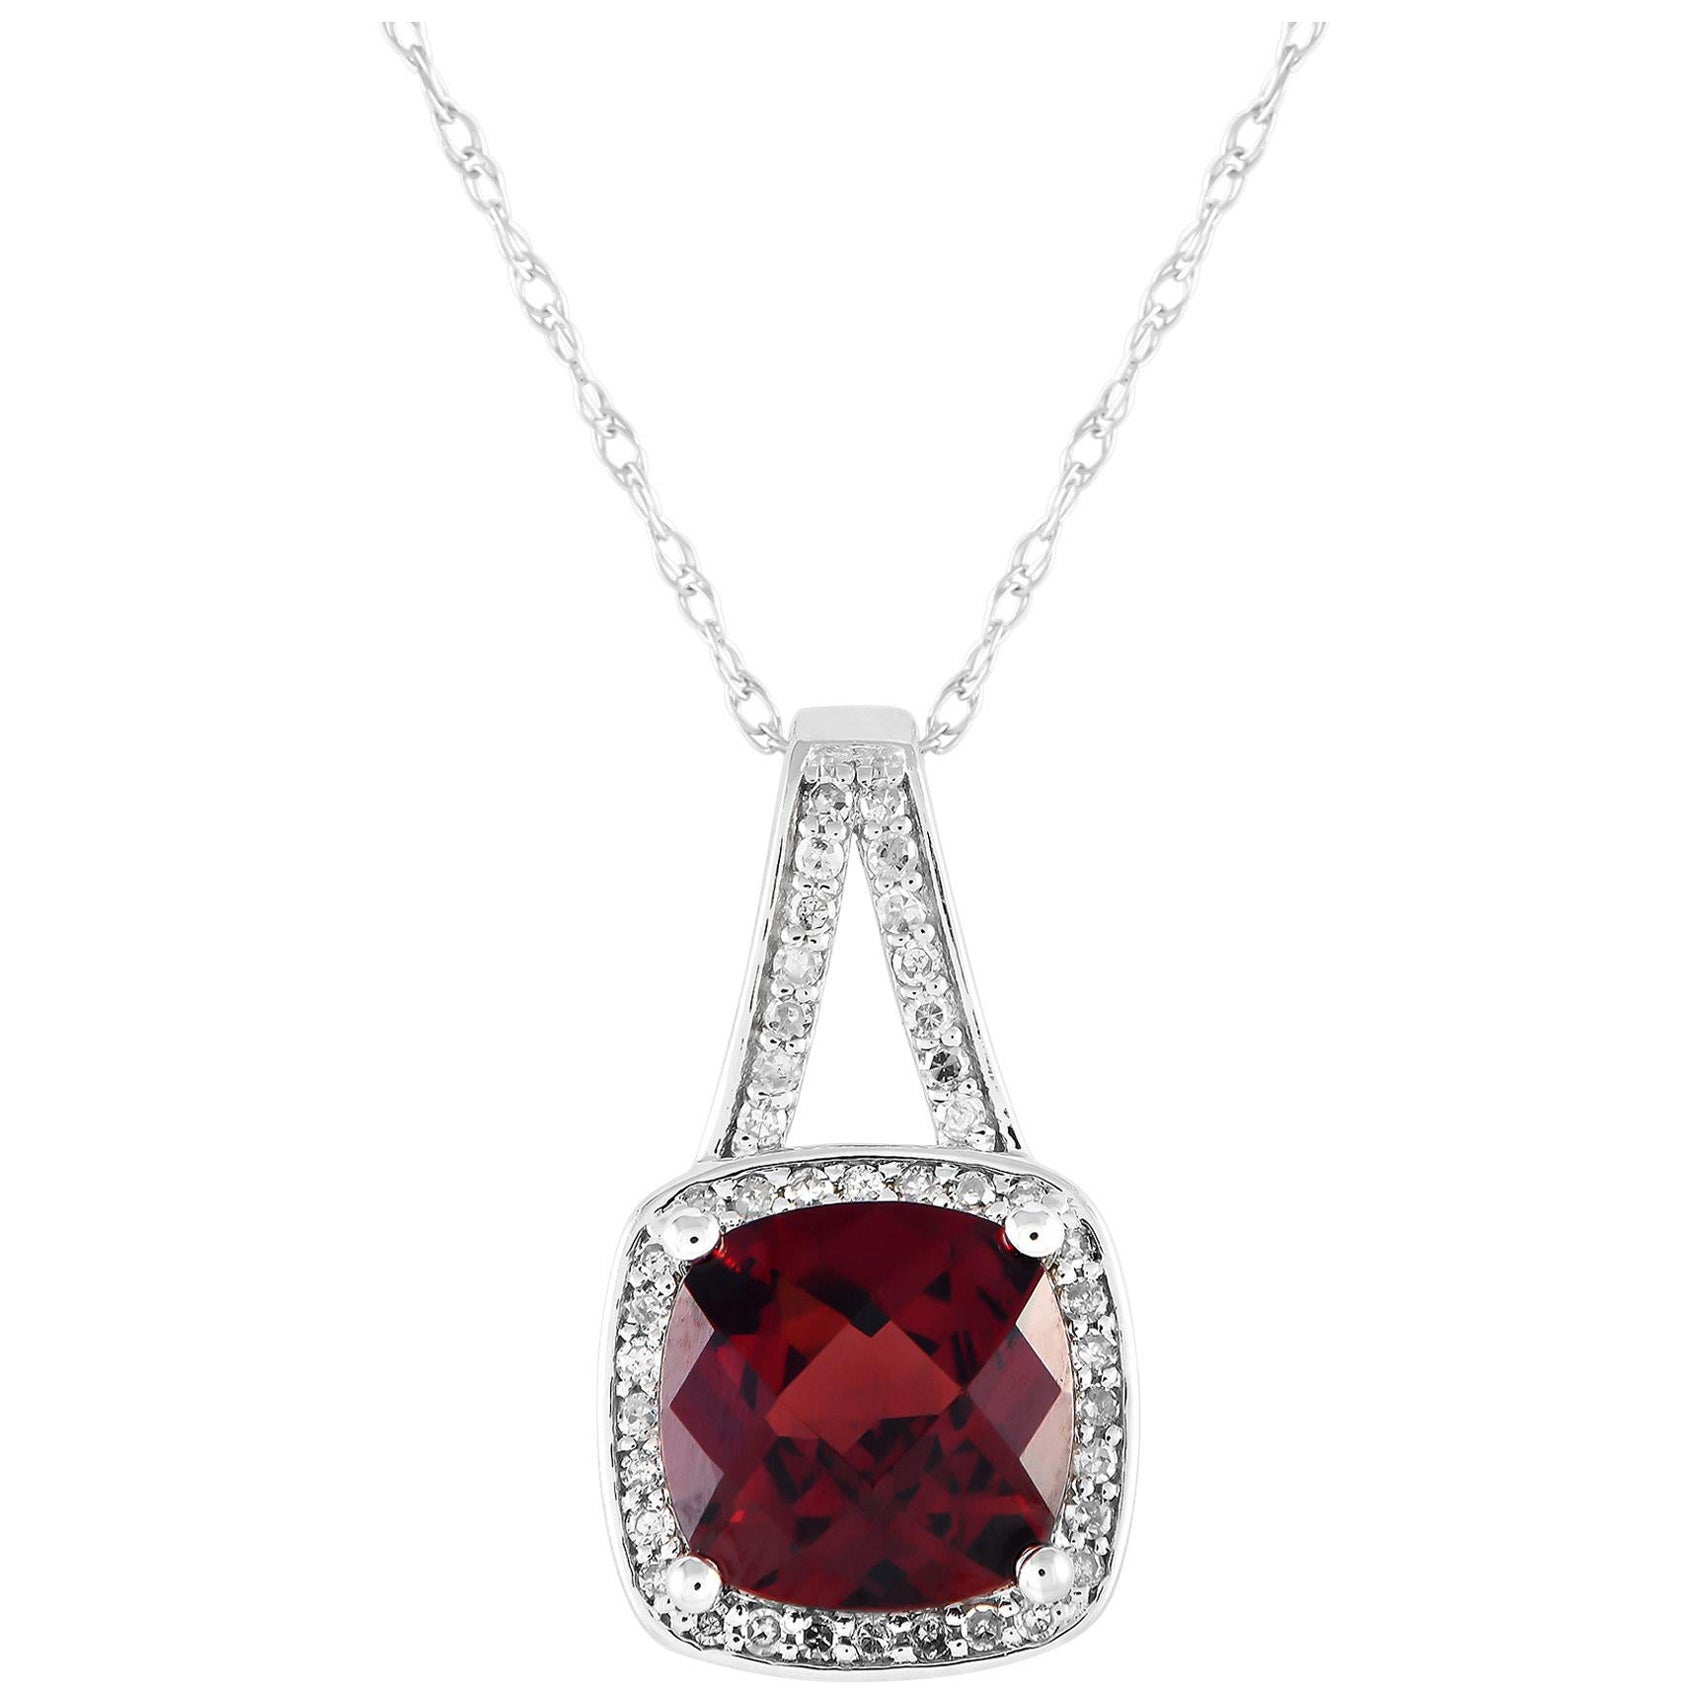 LB Exclusive 14K White Gold 0.12ct Diamond and Garnet Necklace PD4-16273WGA For Sale